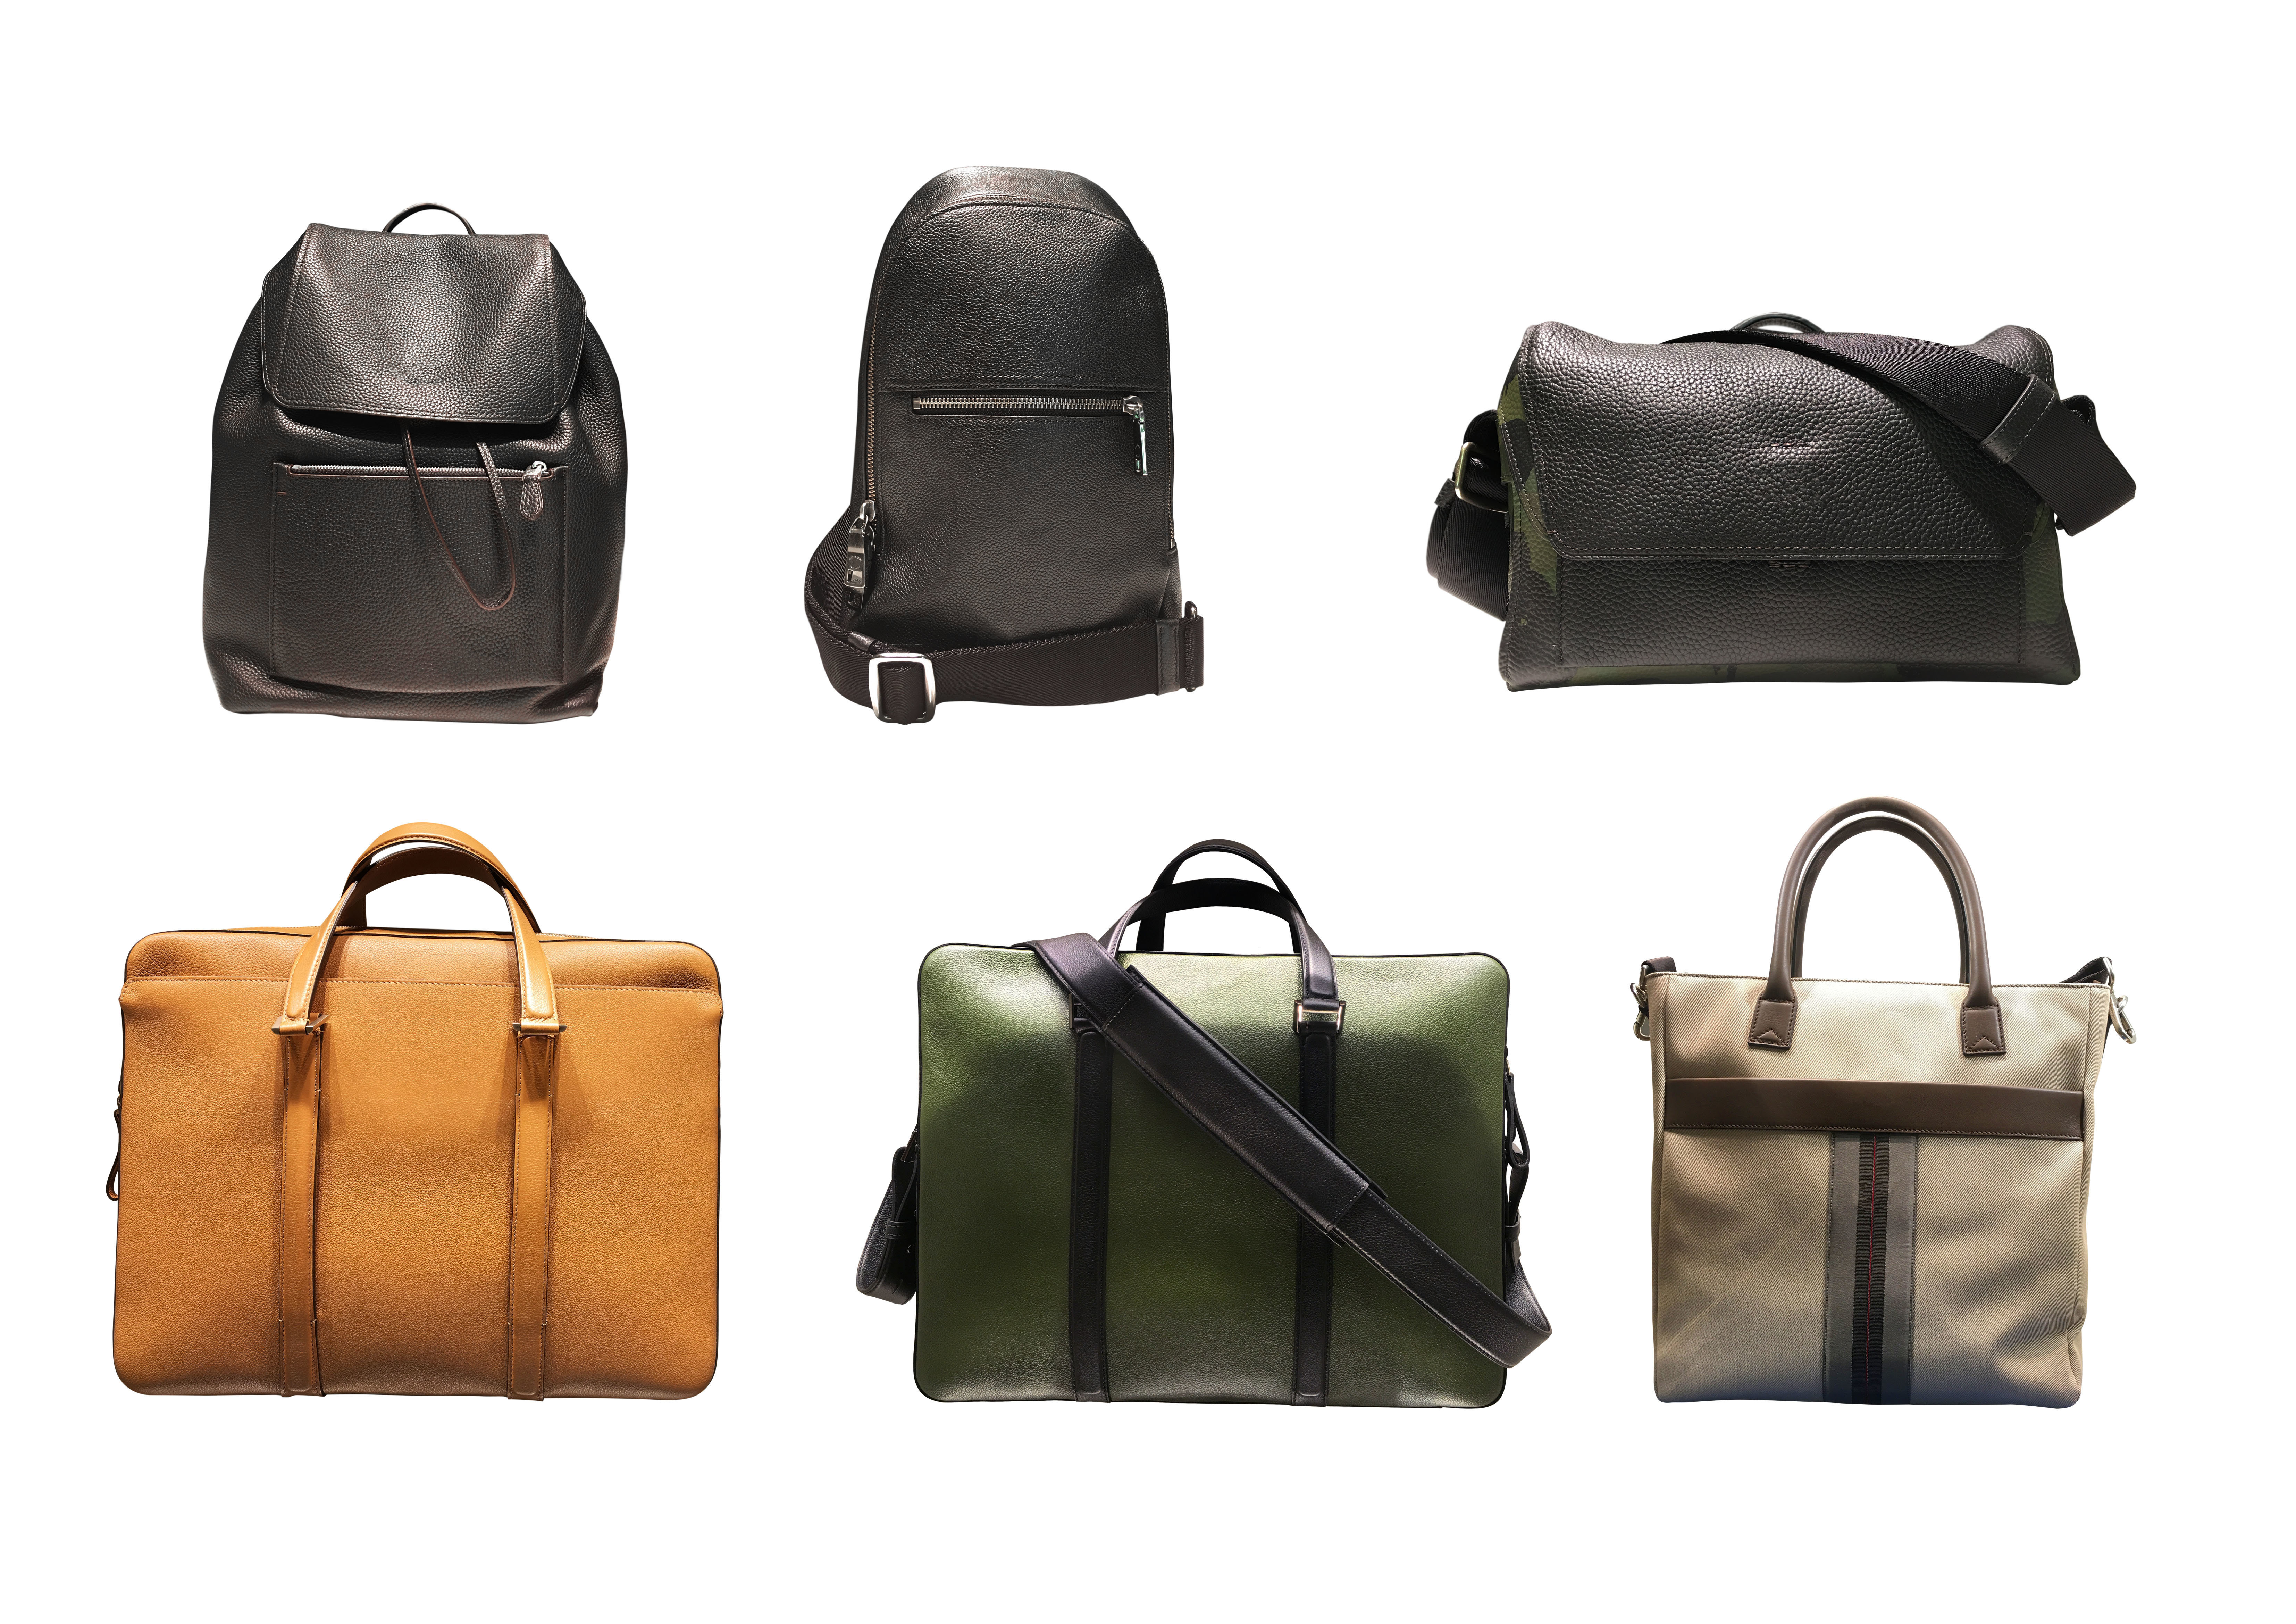 The Best Work Bags For Men 2019 - Forbes Vetted